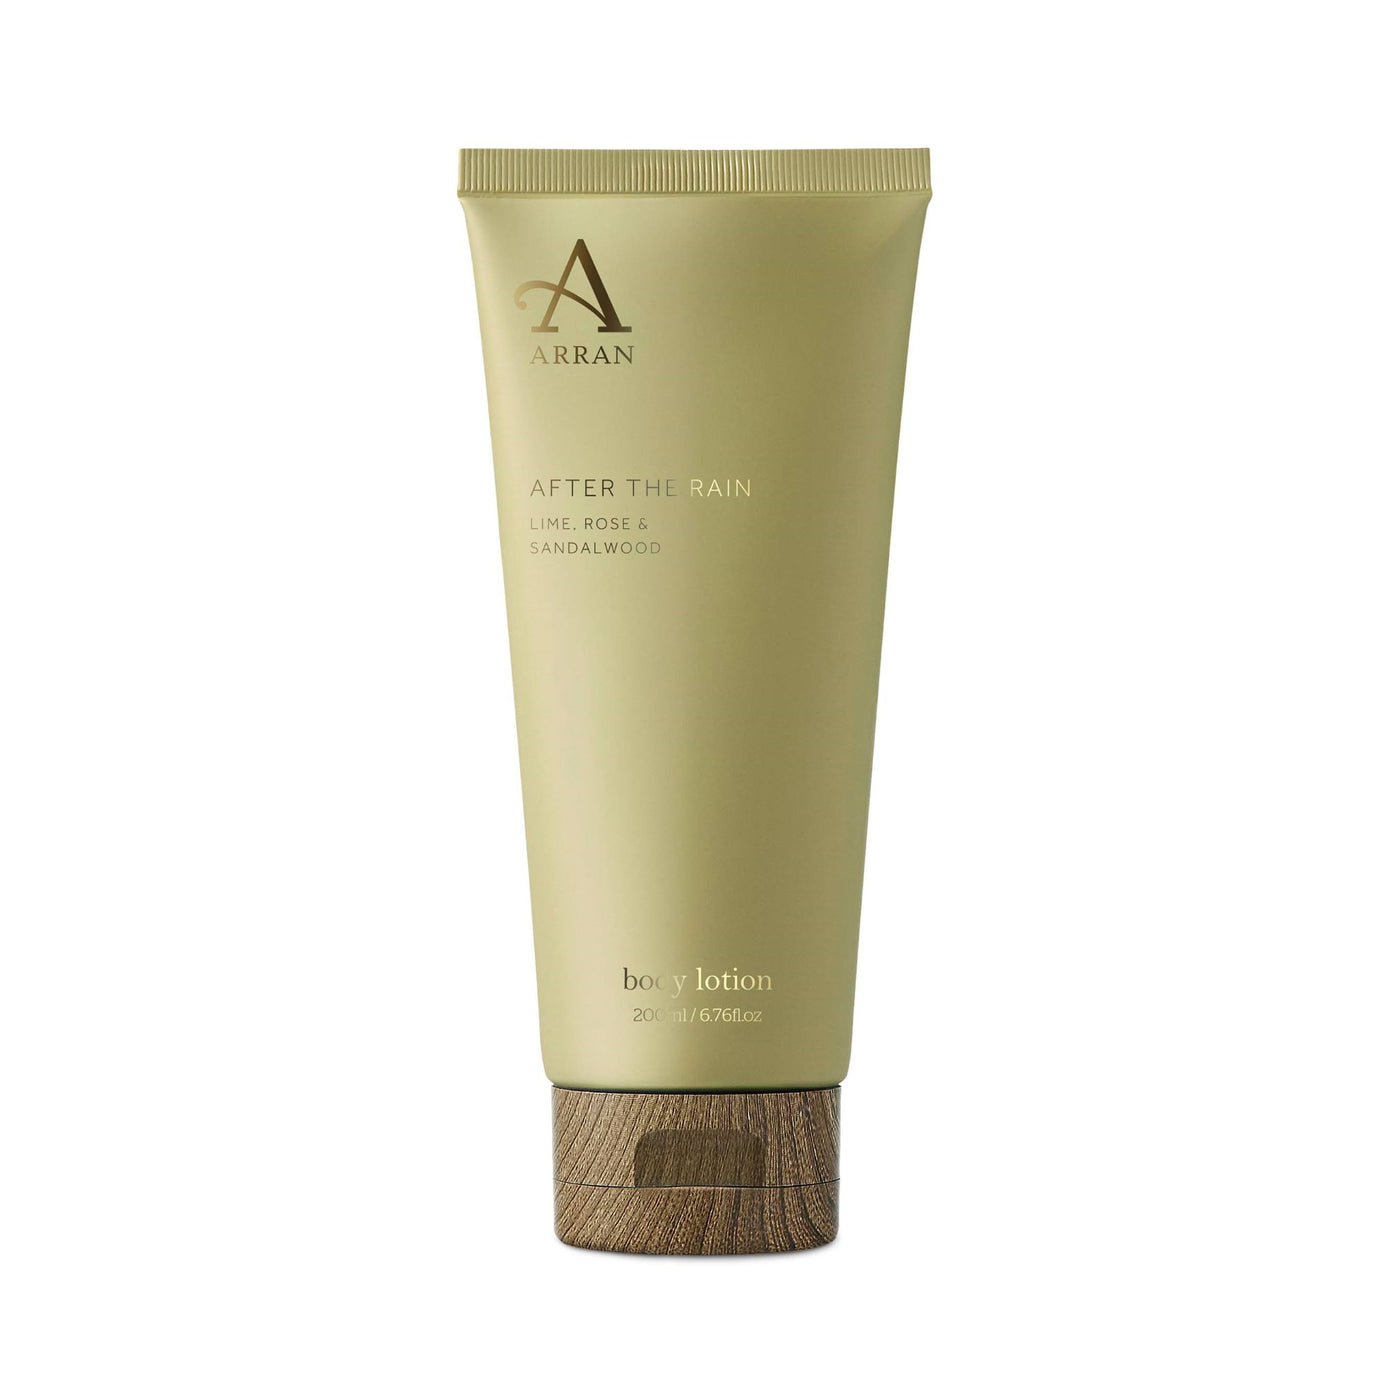 200ml Tube of After the Rain Body Lotion from Arran Sense of Scotland